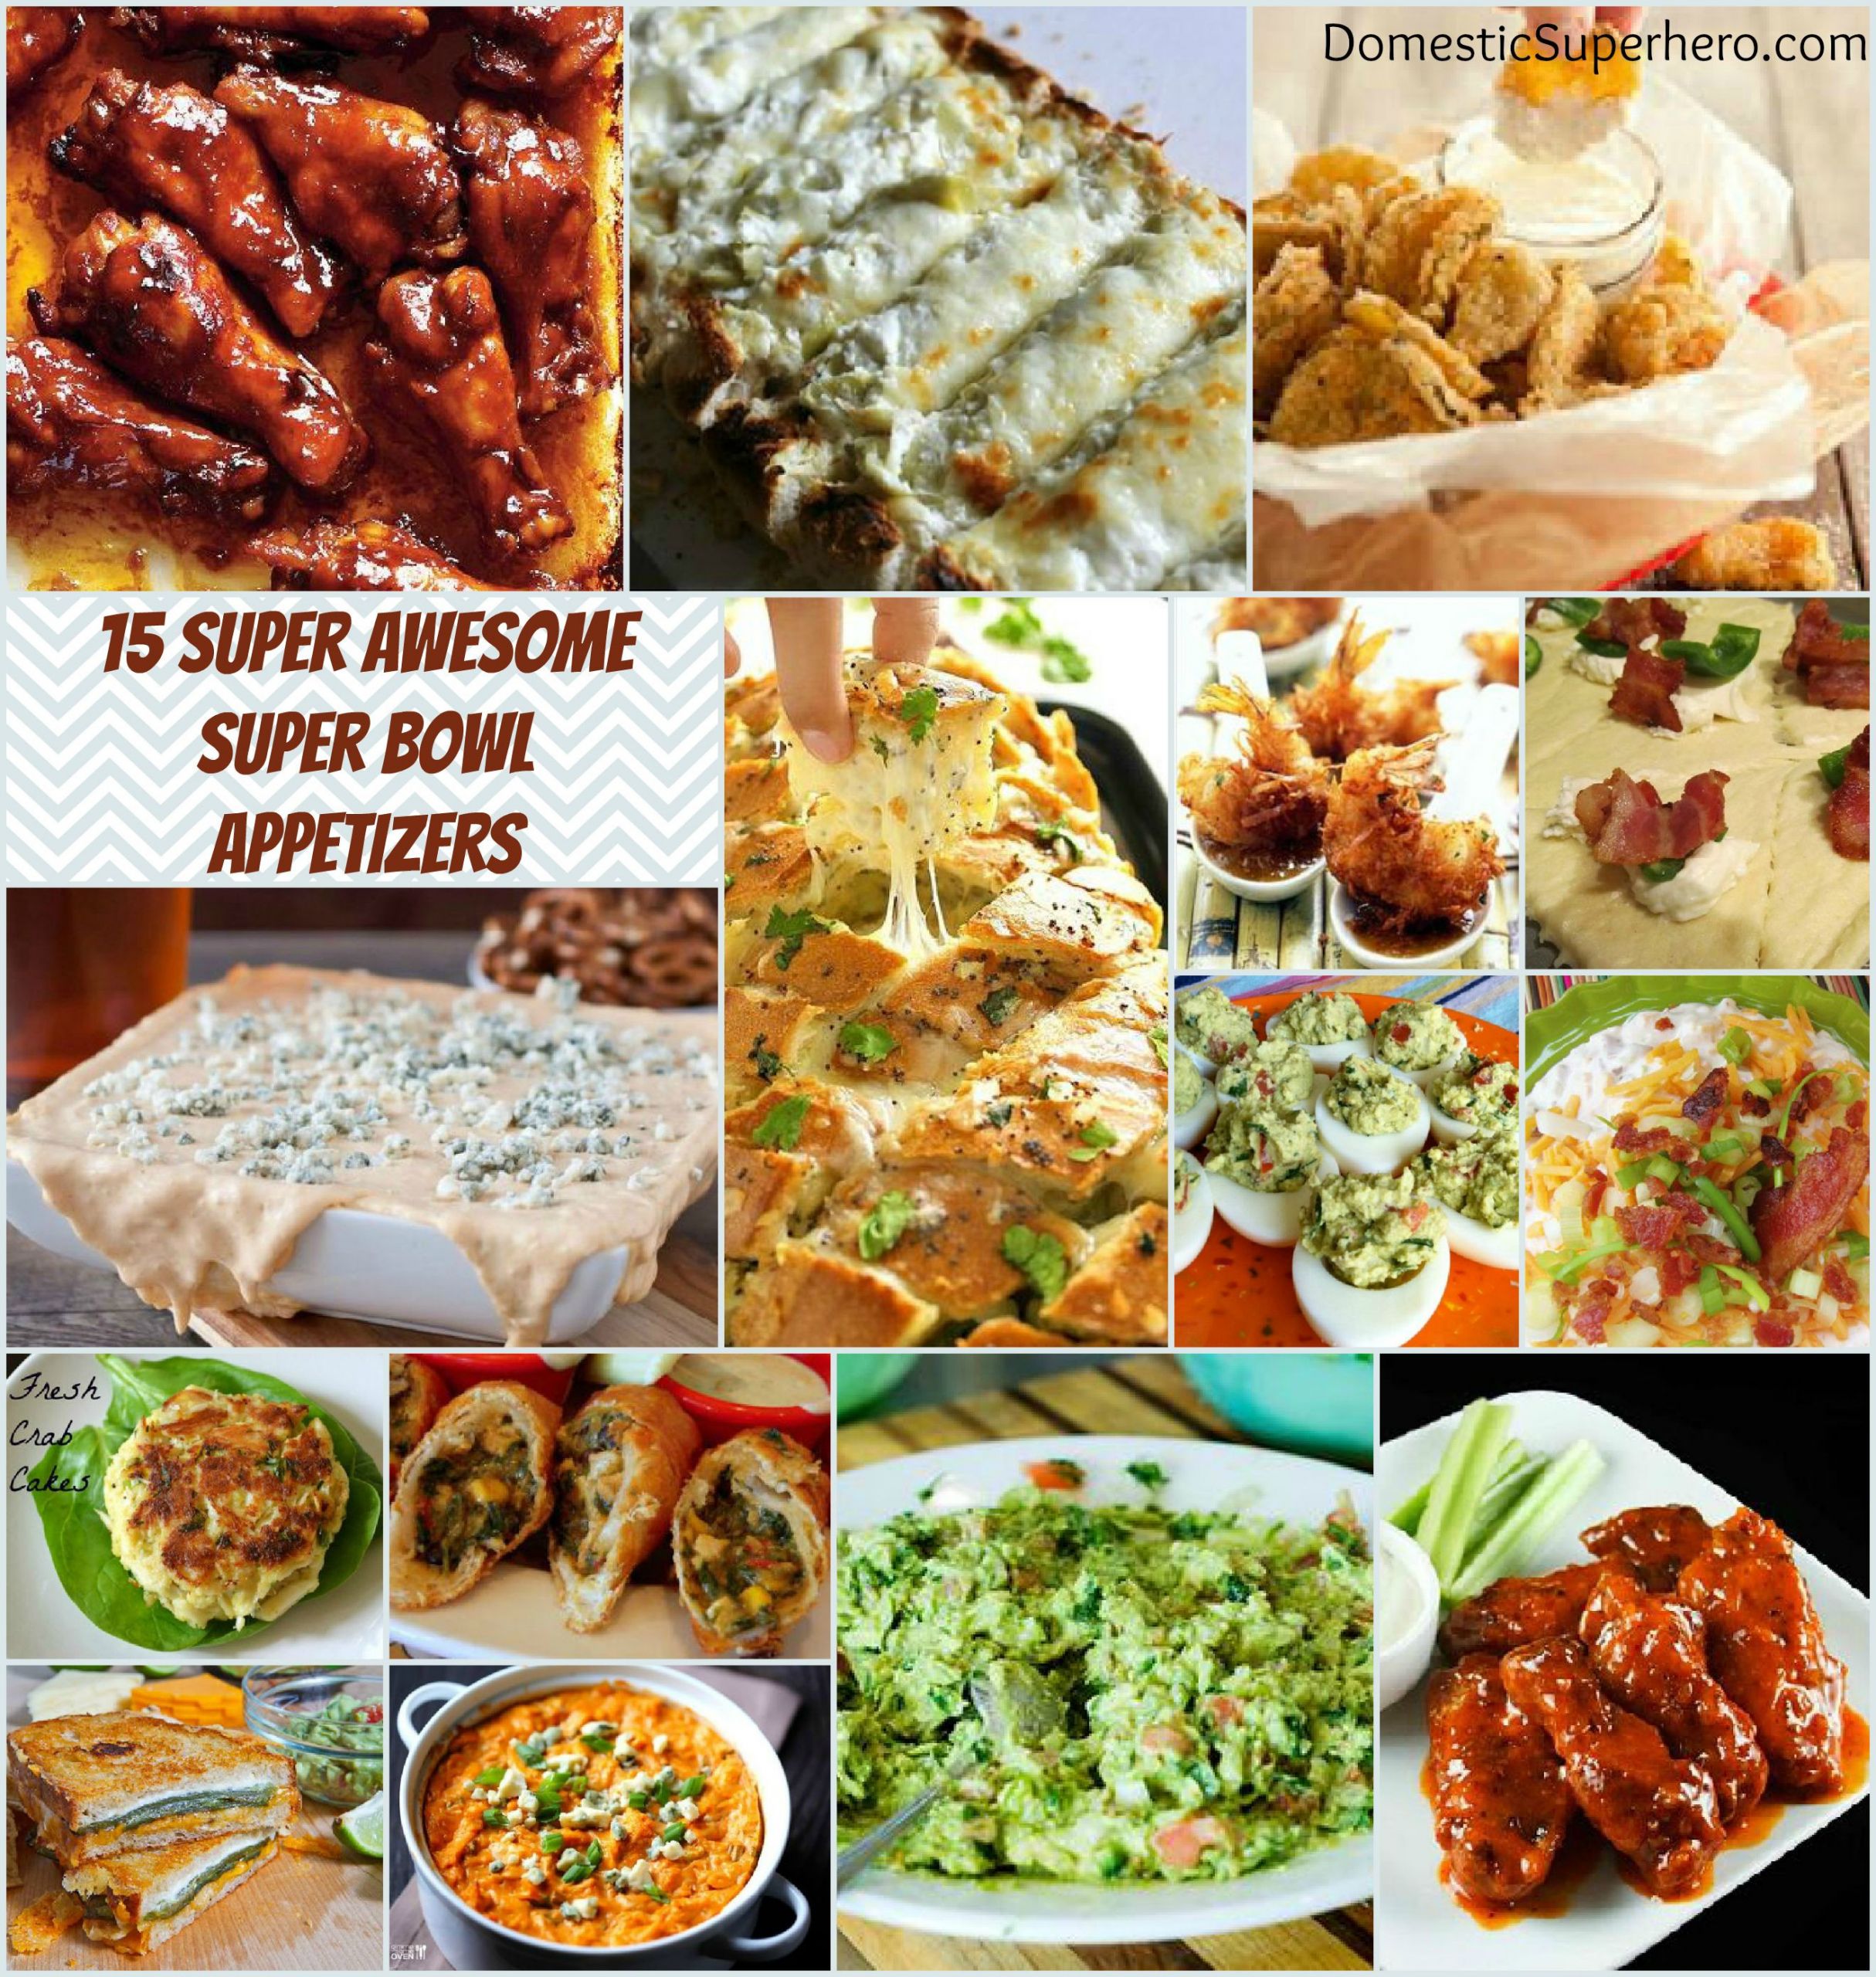 Awesome Super Bowl Recipes
 15 Super Awesome Super Bowl Appetizers